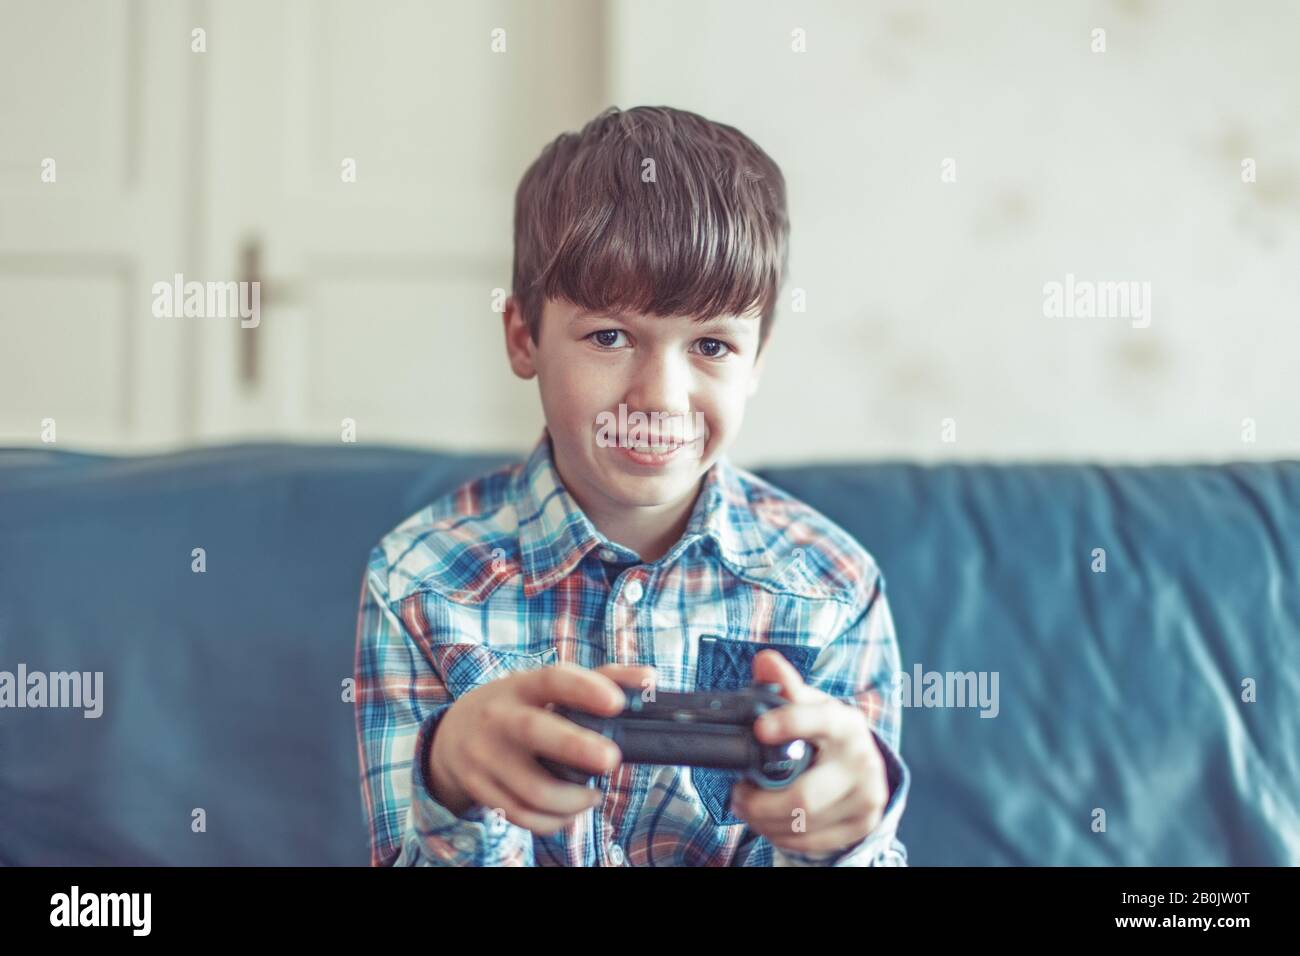 Boy playing a video game - Stock Image - T485/0068 - Science Photo